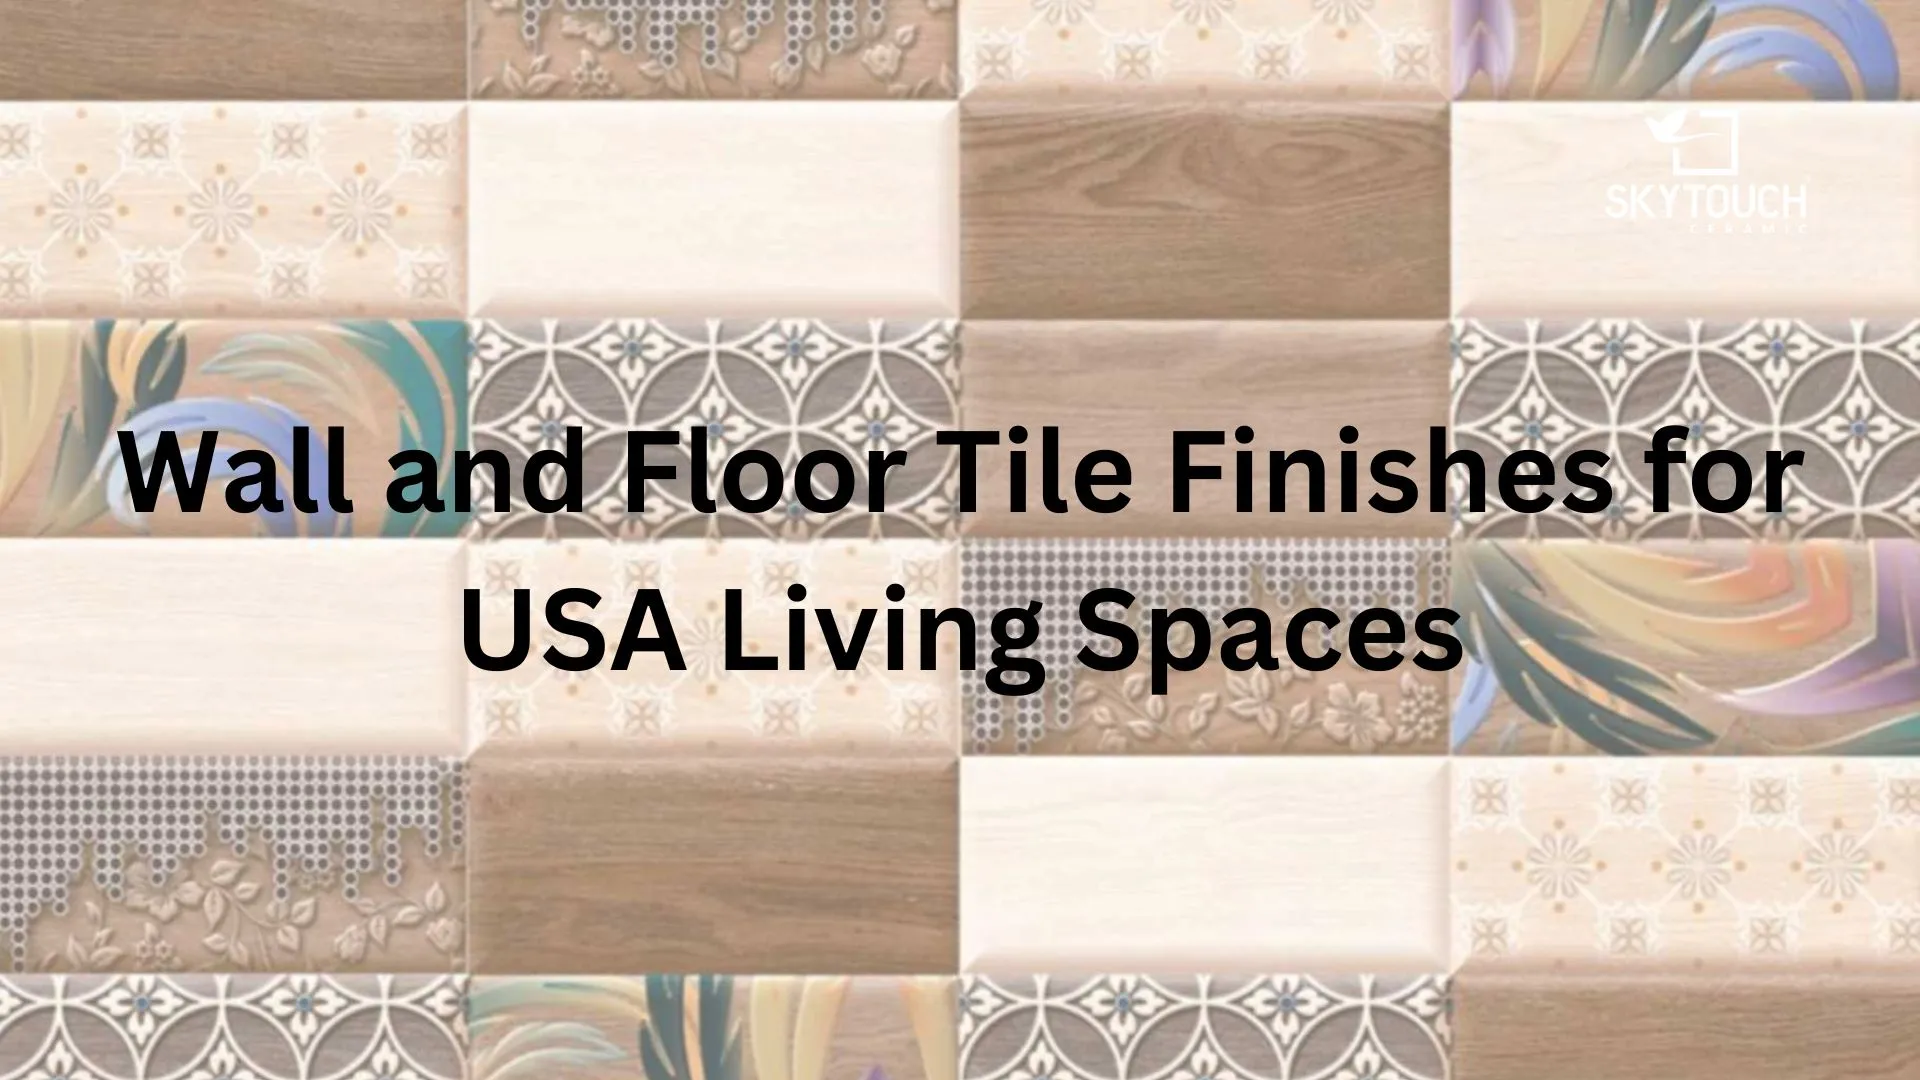 Wall and Floor Tile Finishes for USA Living Spaces